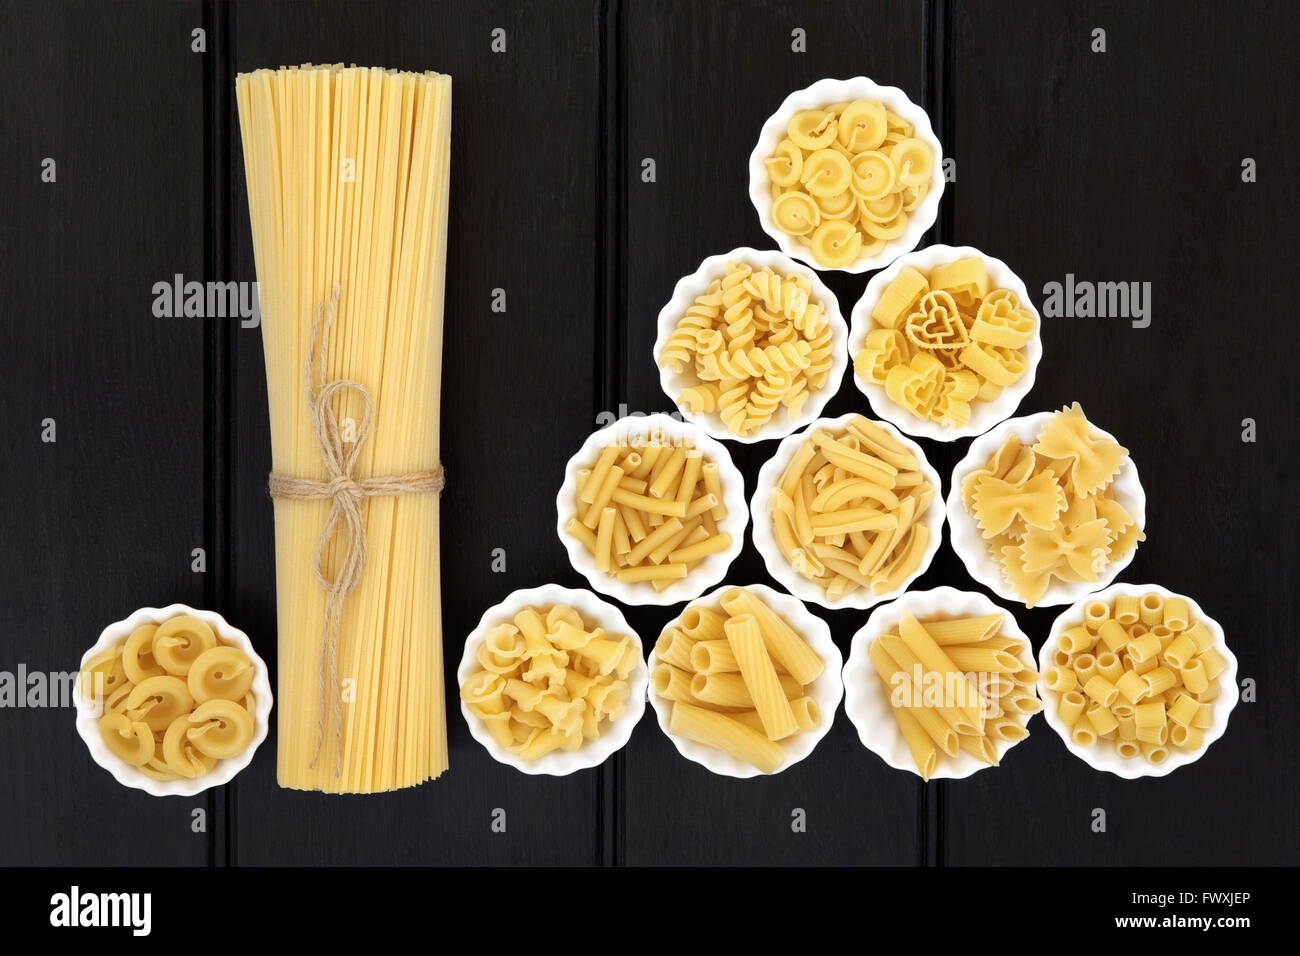 Spaghetti pasta dried food selection in a bundle and in porcelain crinkle bowls  over dark wood  background. Stock Photo